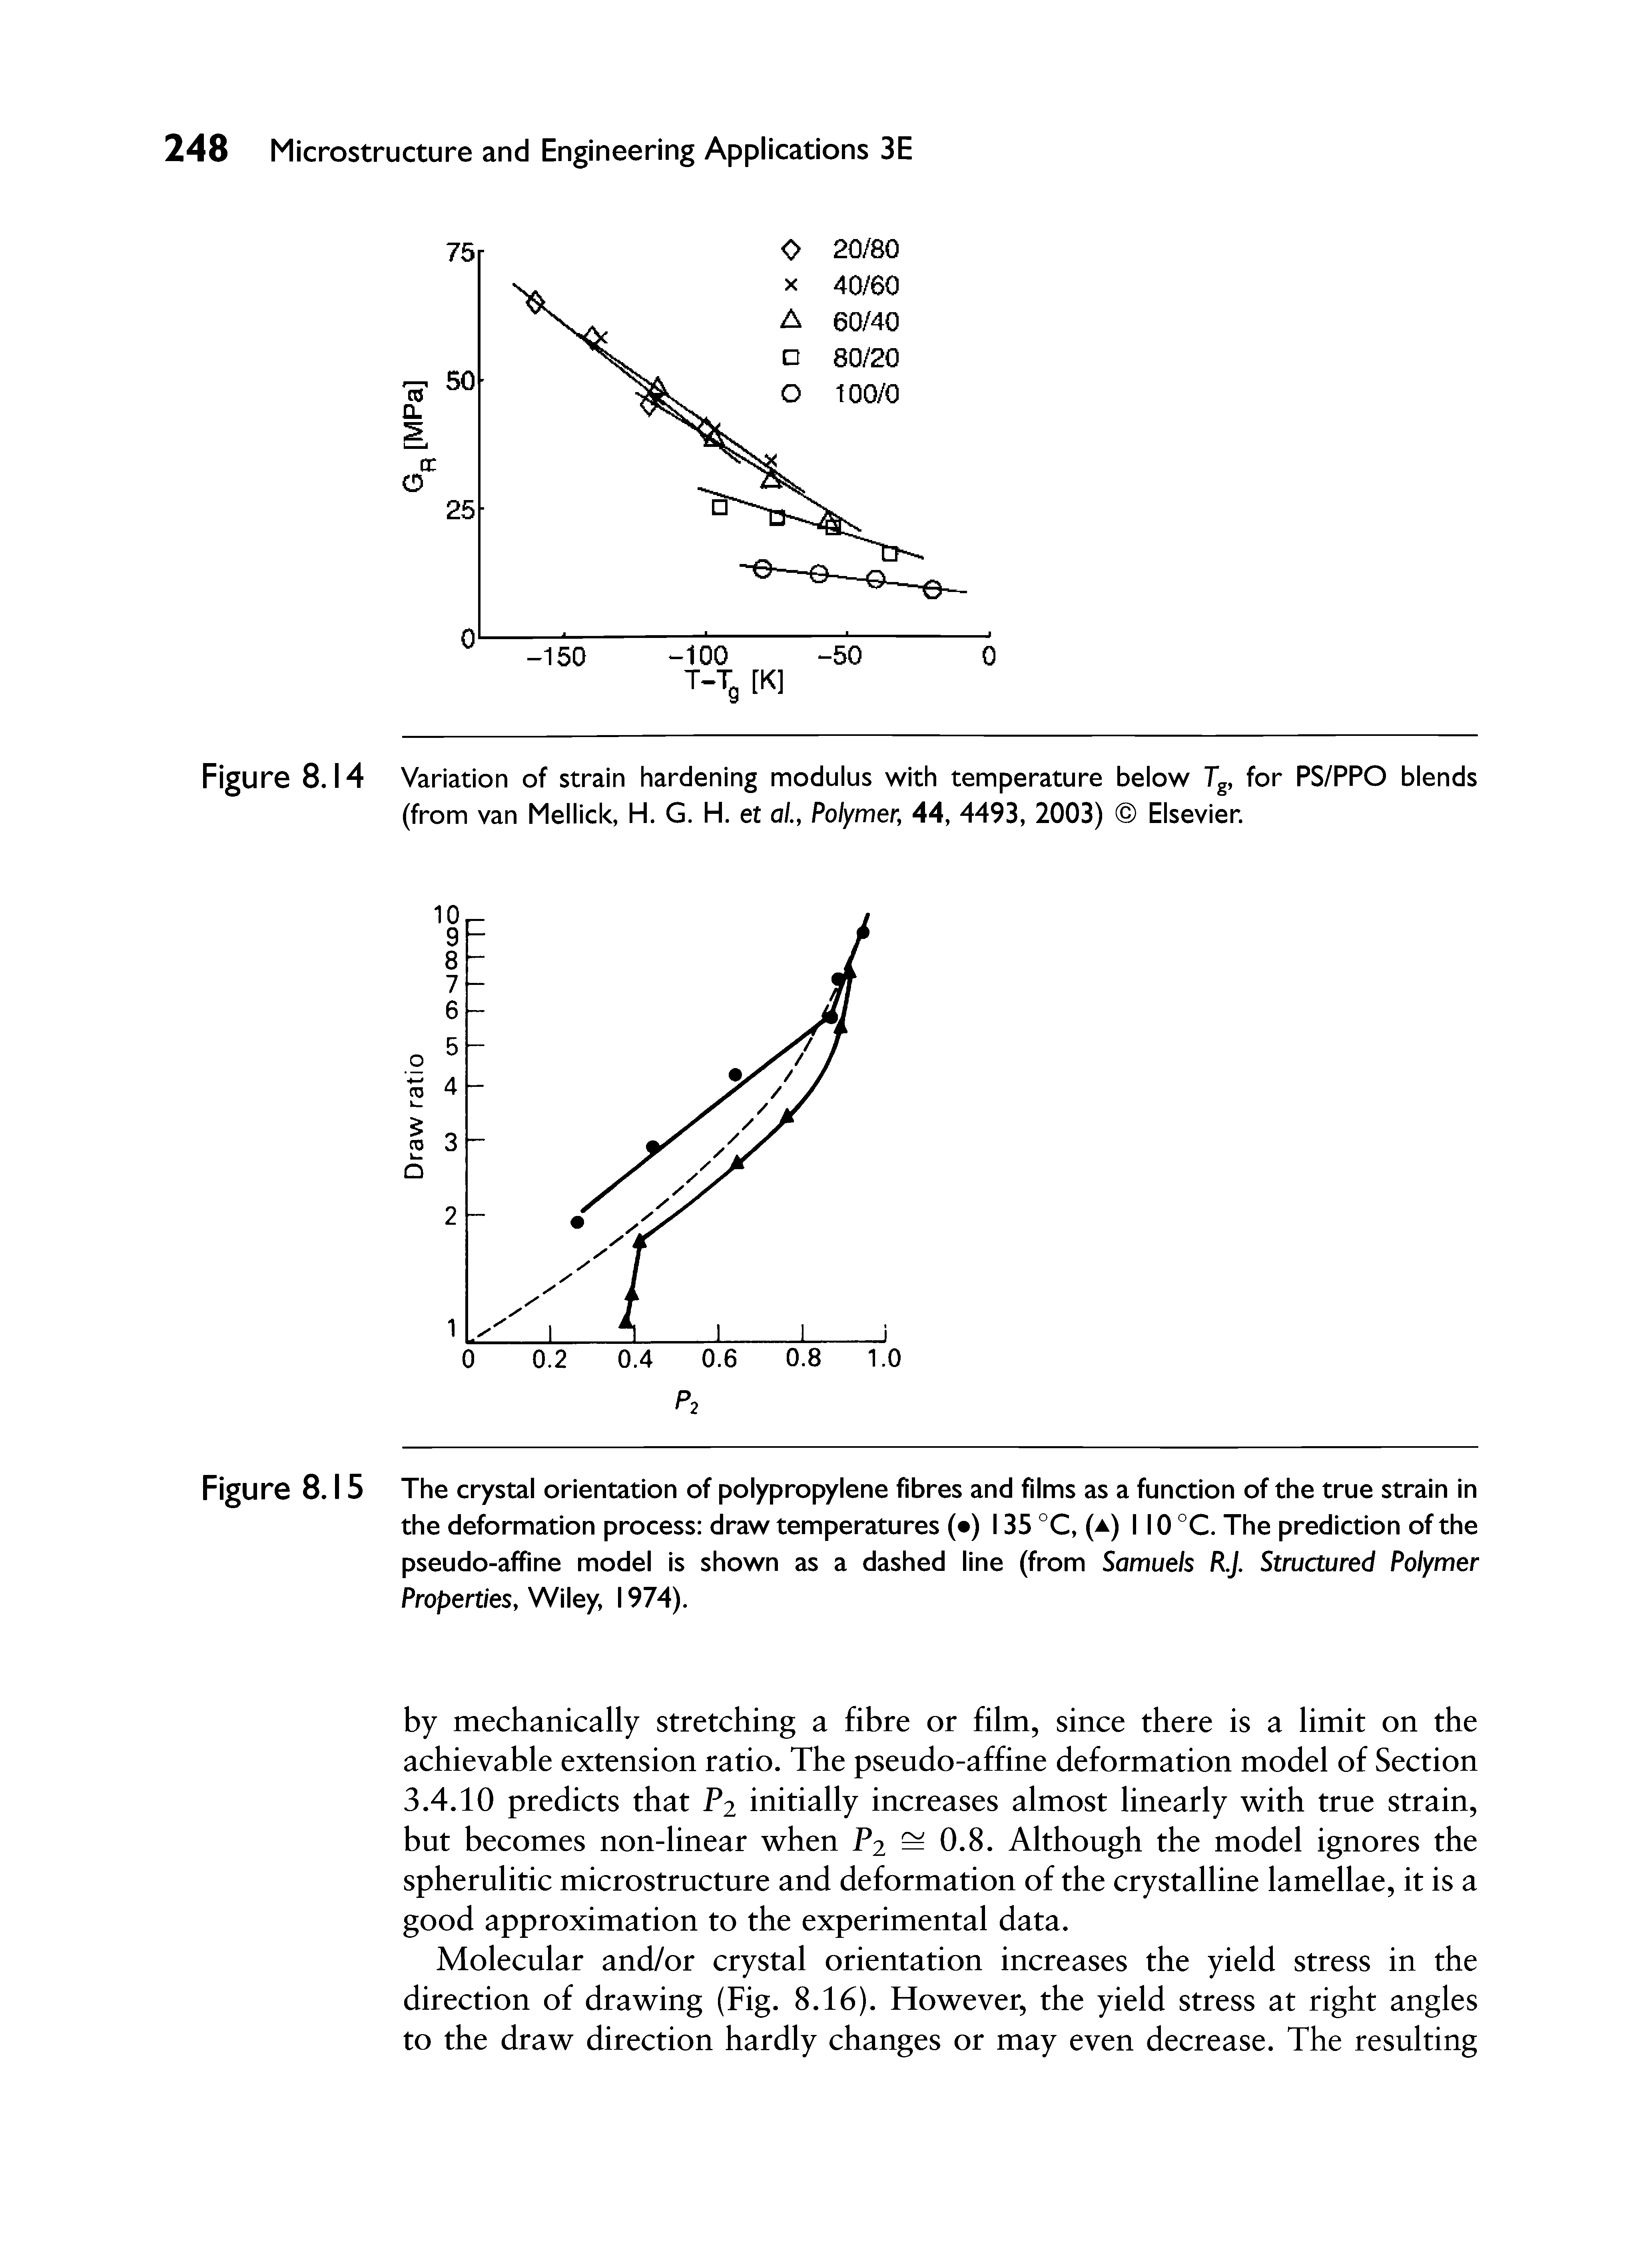 Figure 8.14 Variation of strain hardening modulus with temperature below Tg, for PS/PPO blends (from van Mellick, H. G. H. et o/., Polymer 44, 4493, 2003) Elsevier.